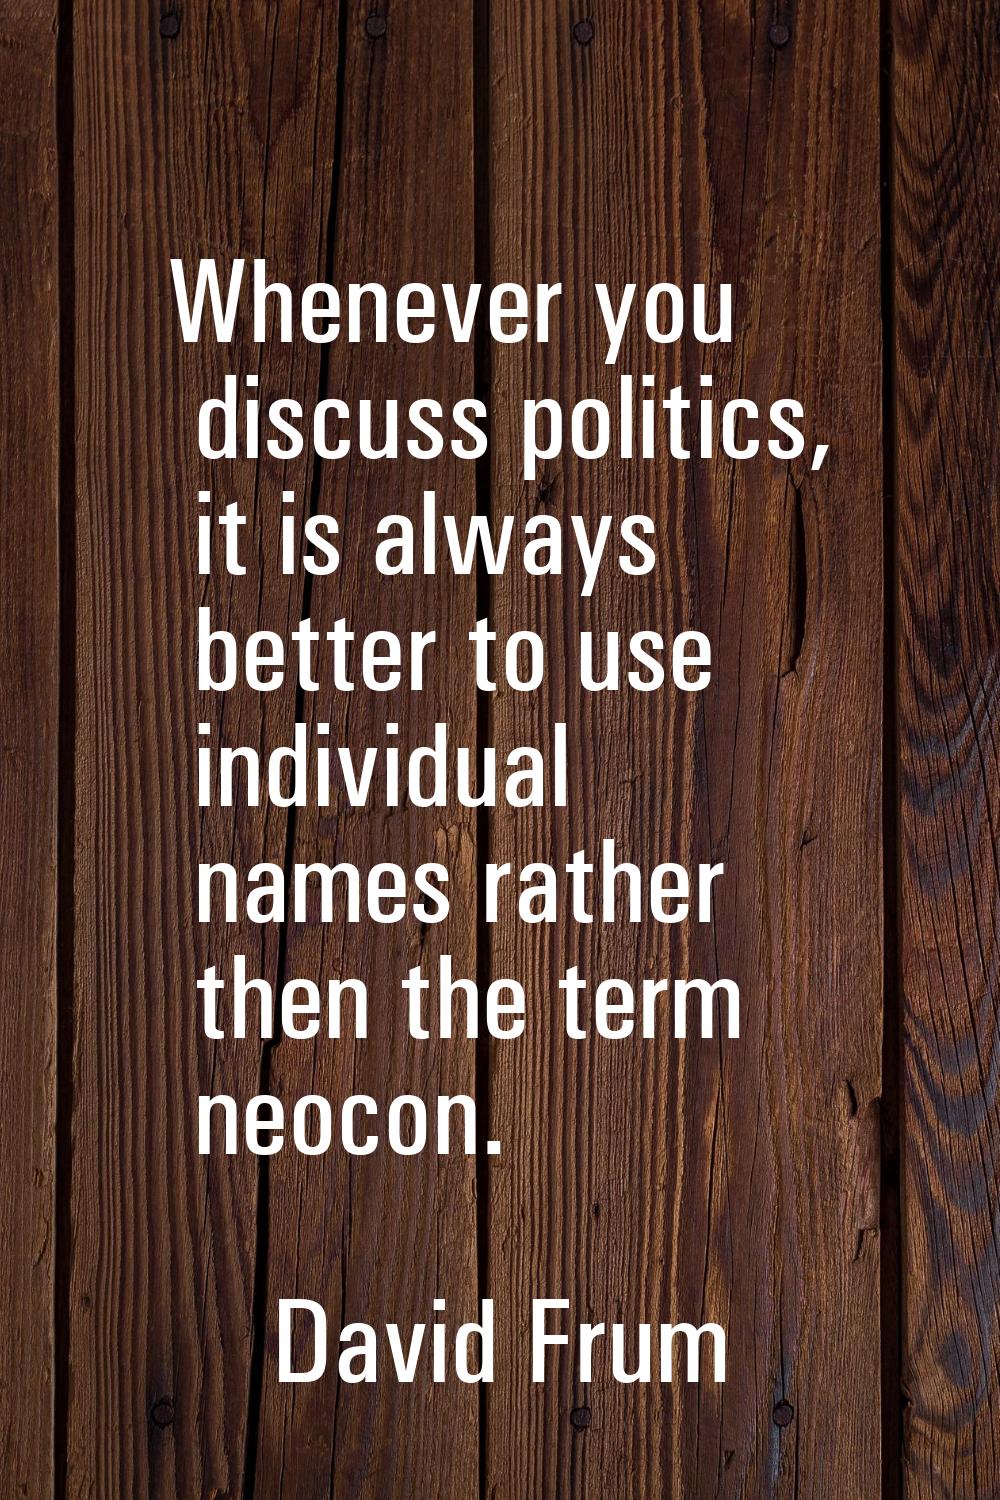 Whenever you discuss politics, it is always better to use individual names rather then the term neo